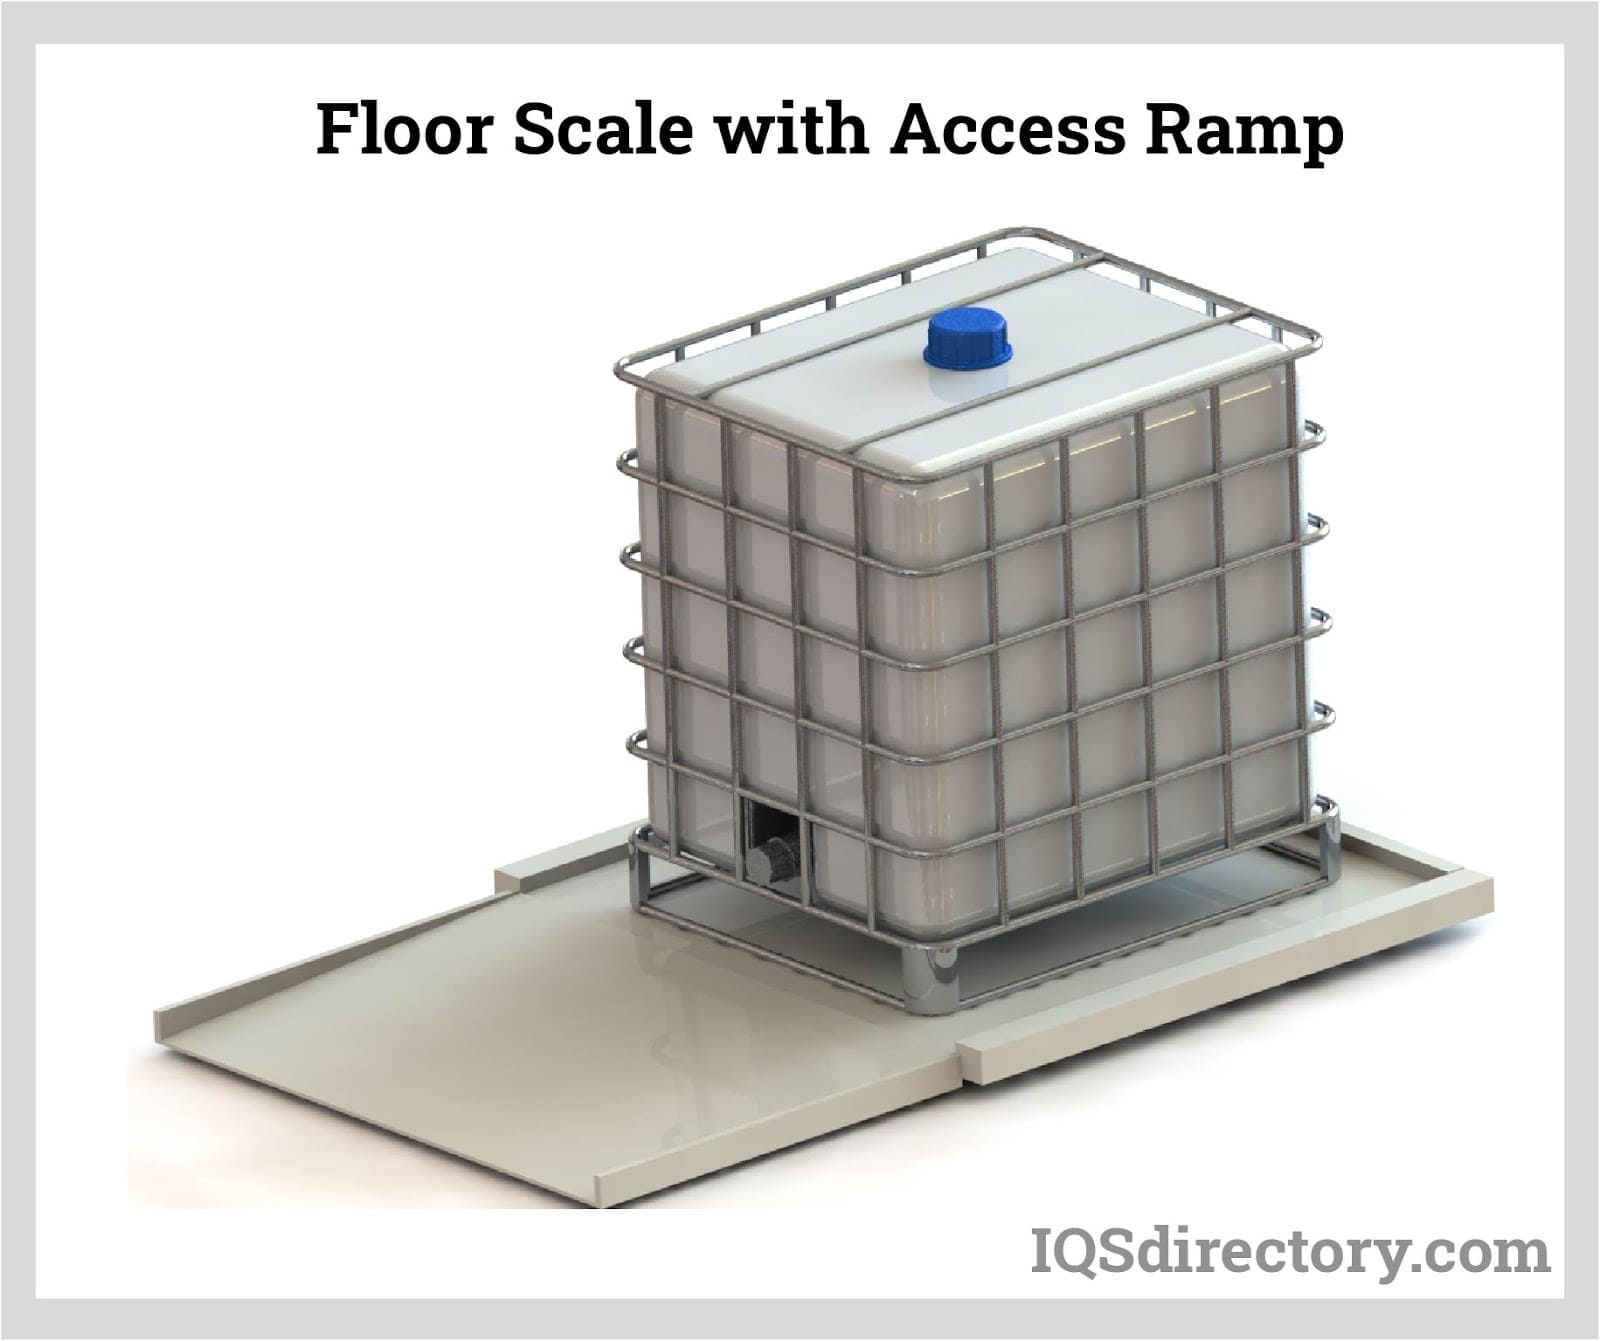 https://www.iqsdirectory.com/articles/scale/platform-scales/floor-scale-with-access-ramp.jpg